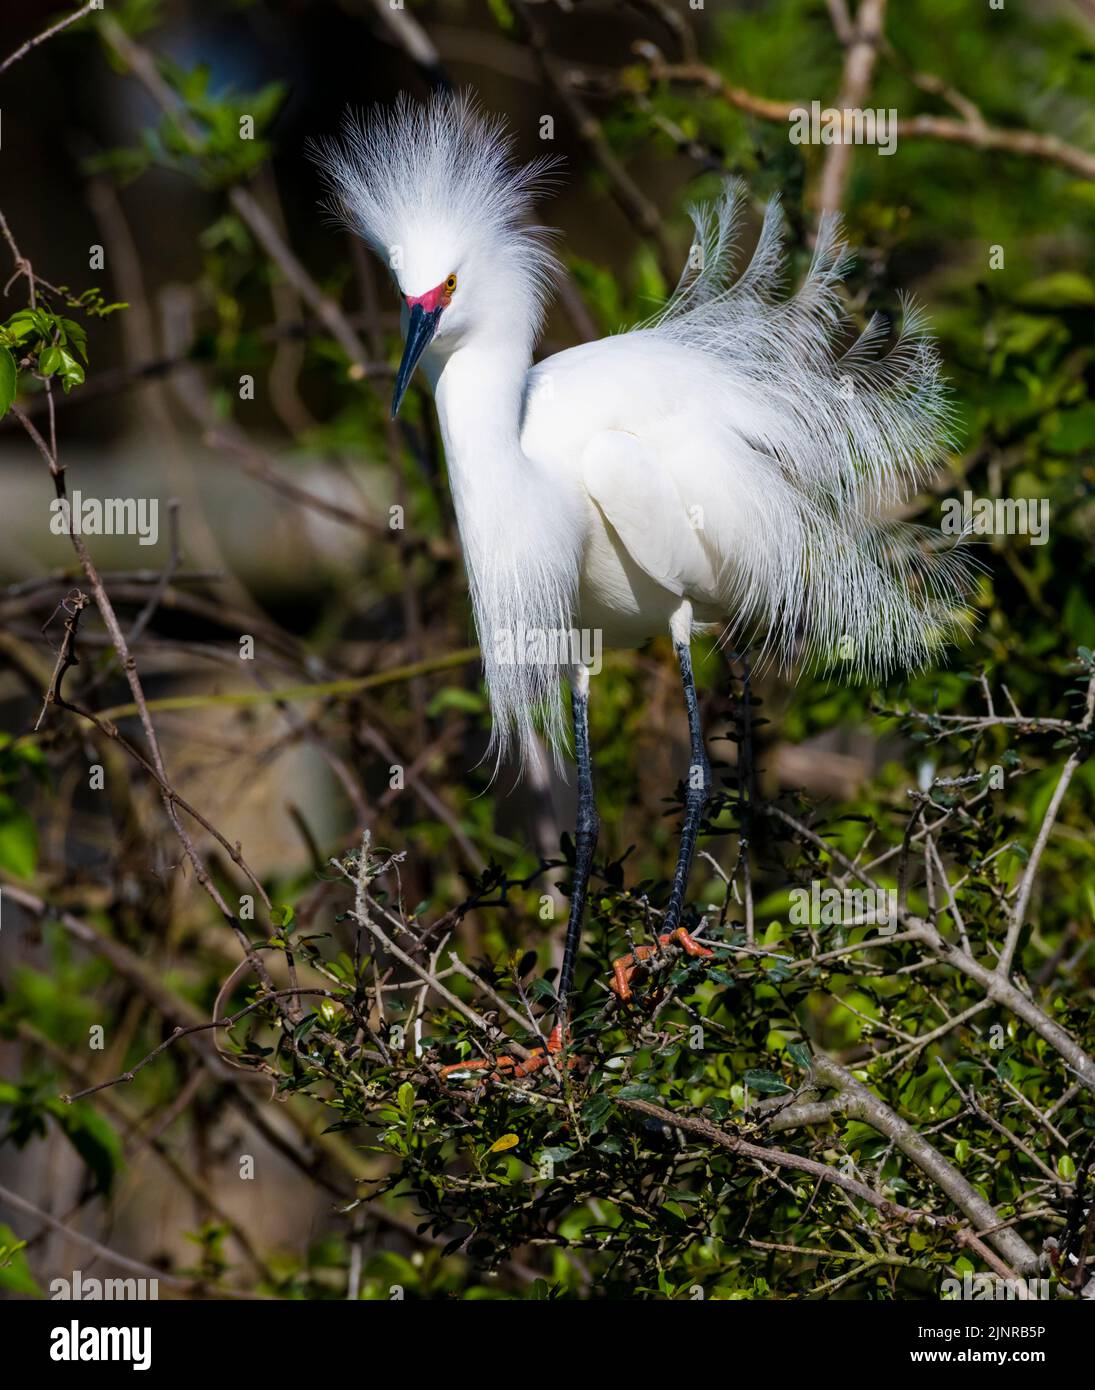 Snowy Egret (Egretta thula). Displaying in a rookery. St. Augustine, Florida. Stock Photo